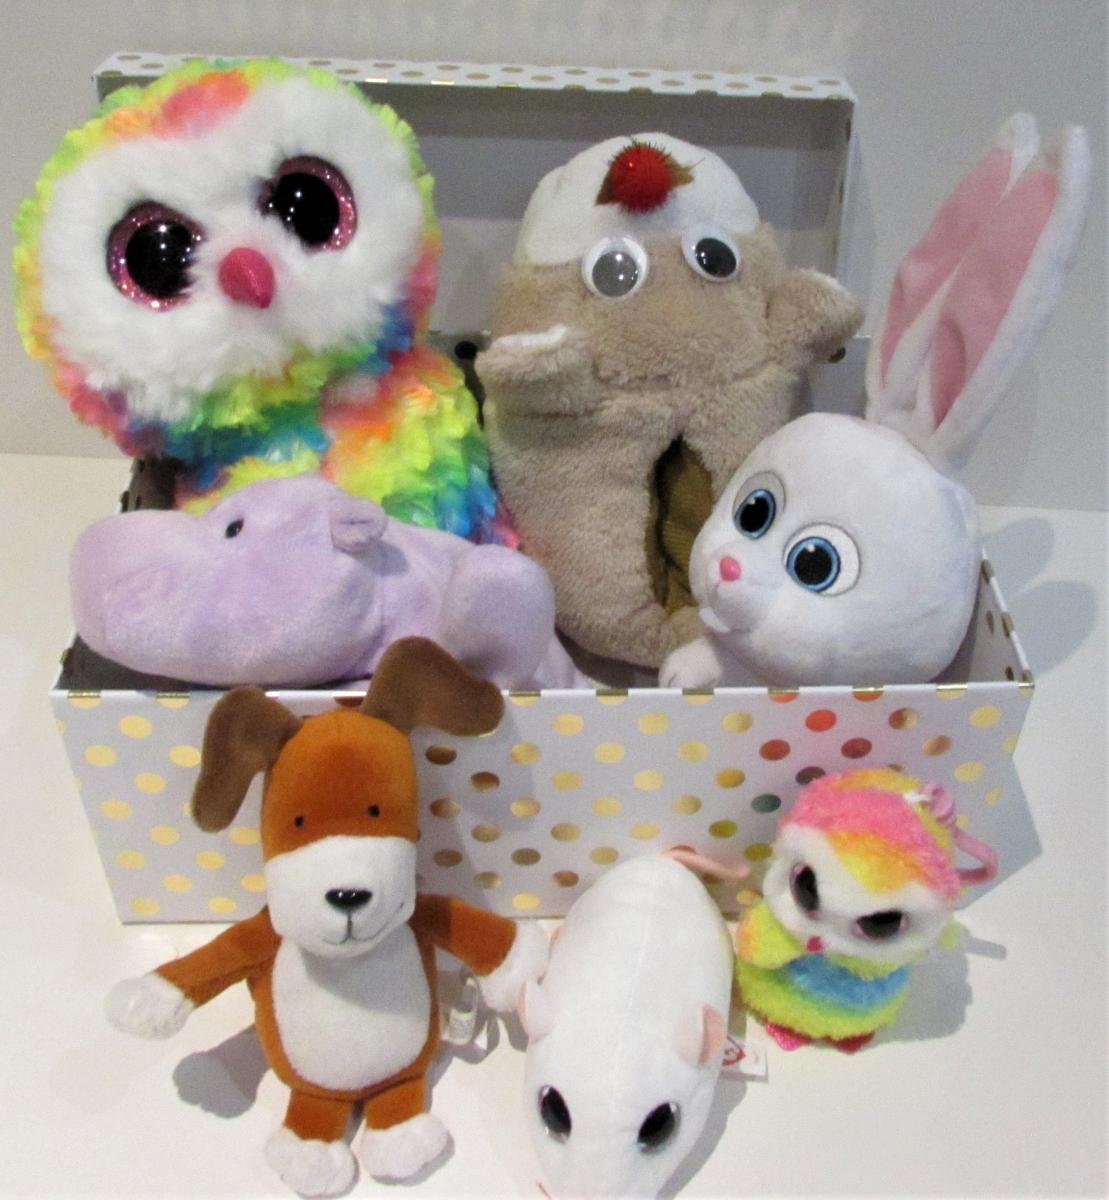 many stuffed toys squeezed into a toy box